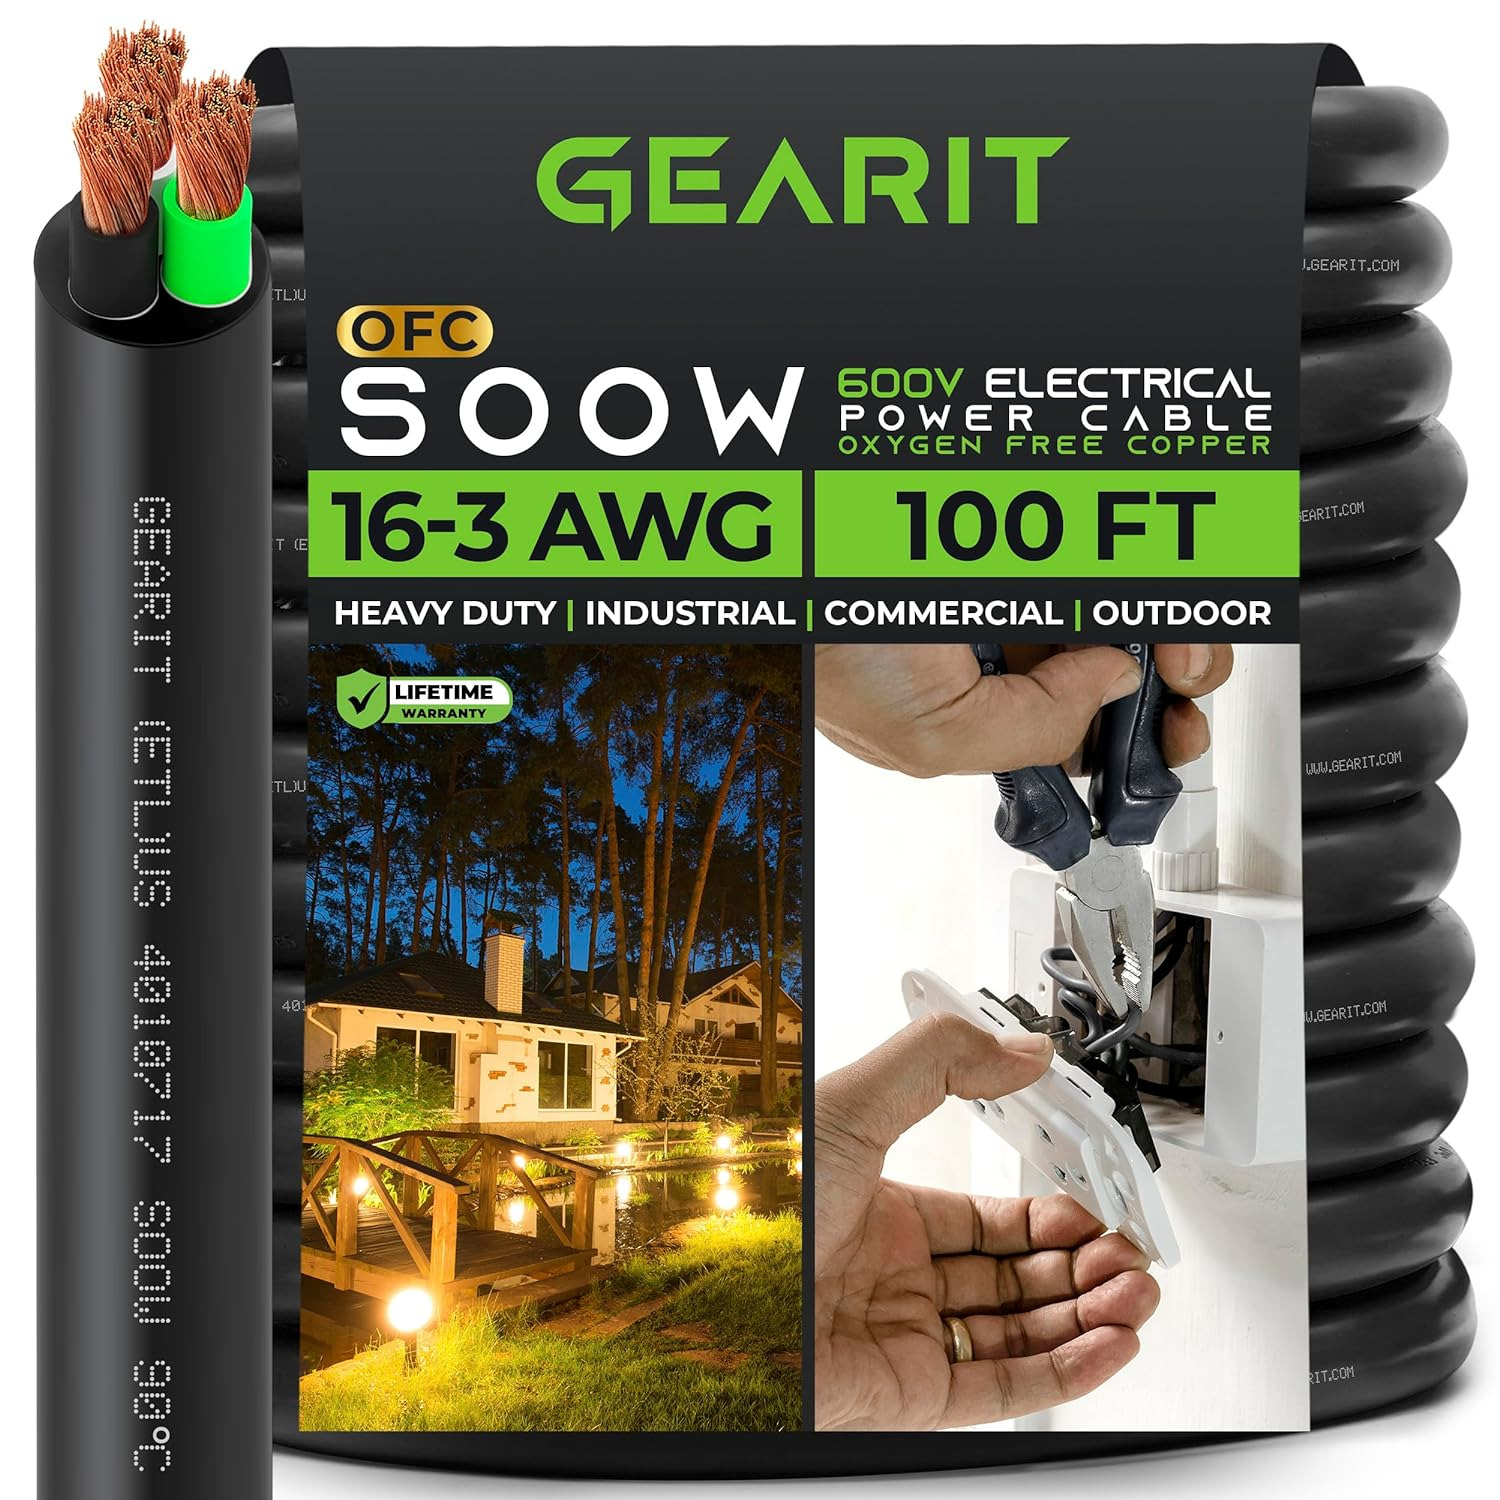 16/3 16 AWG Portable Power Cable (100 Feet - 3 Conductor) SOOW 600V 16 Gauge Ele